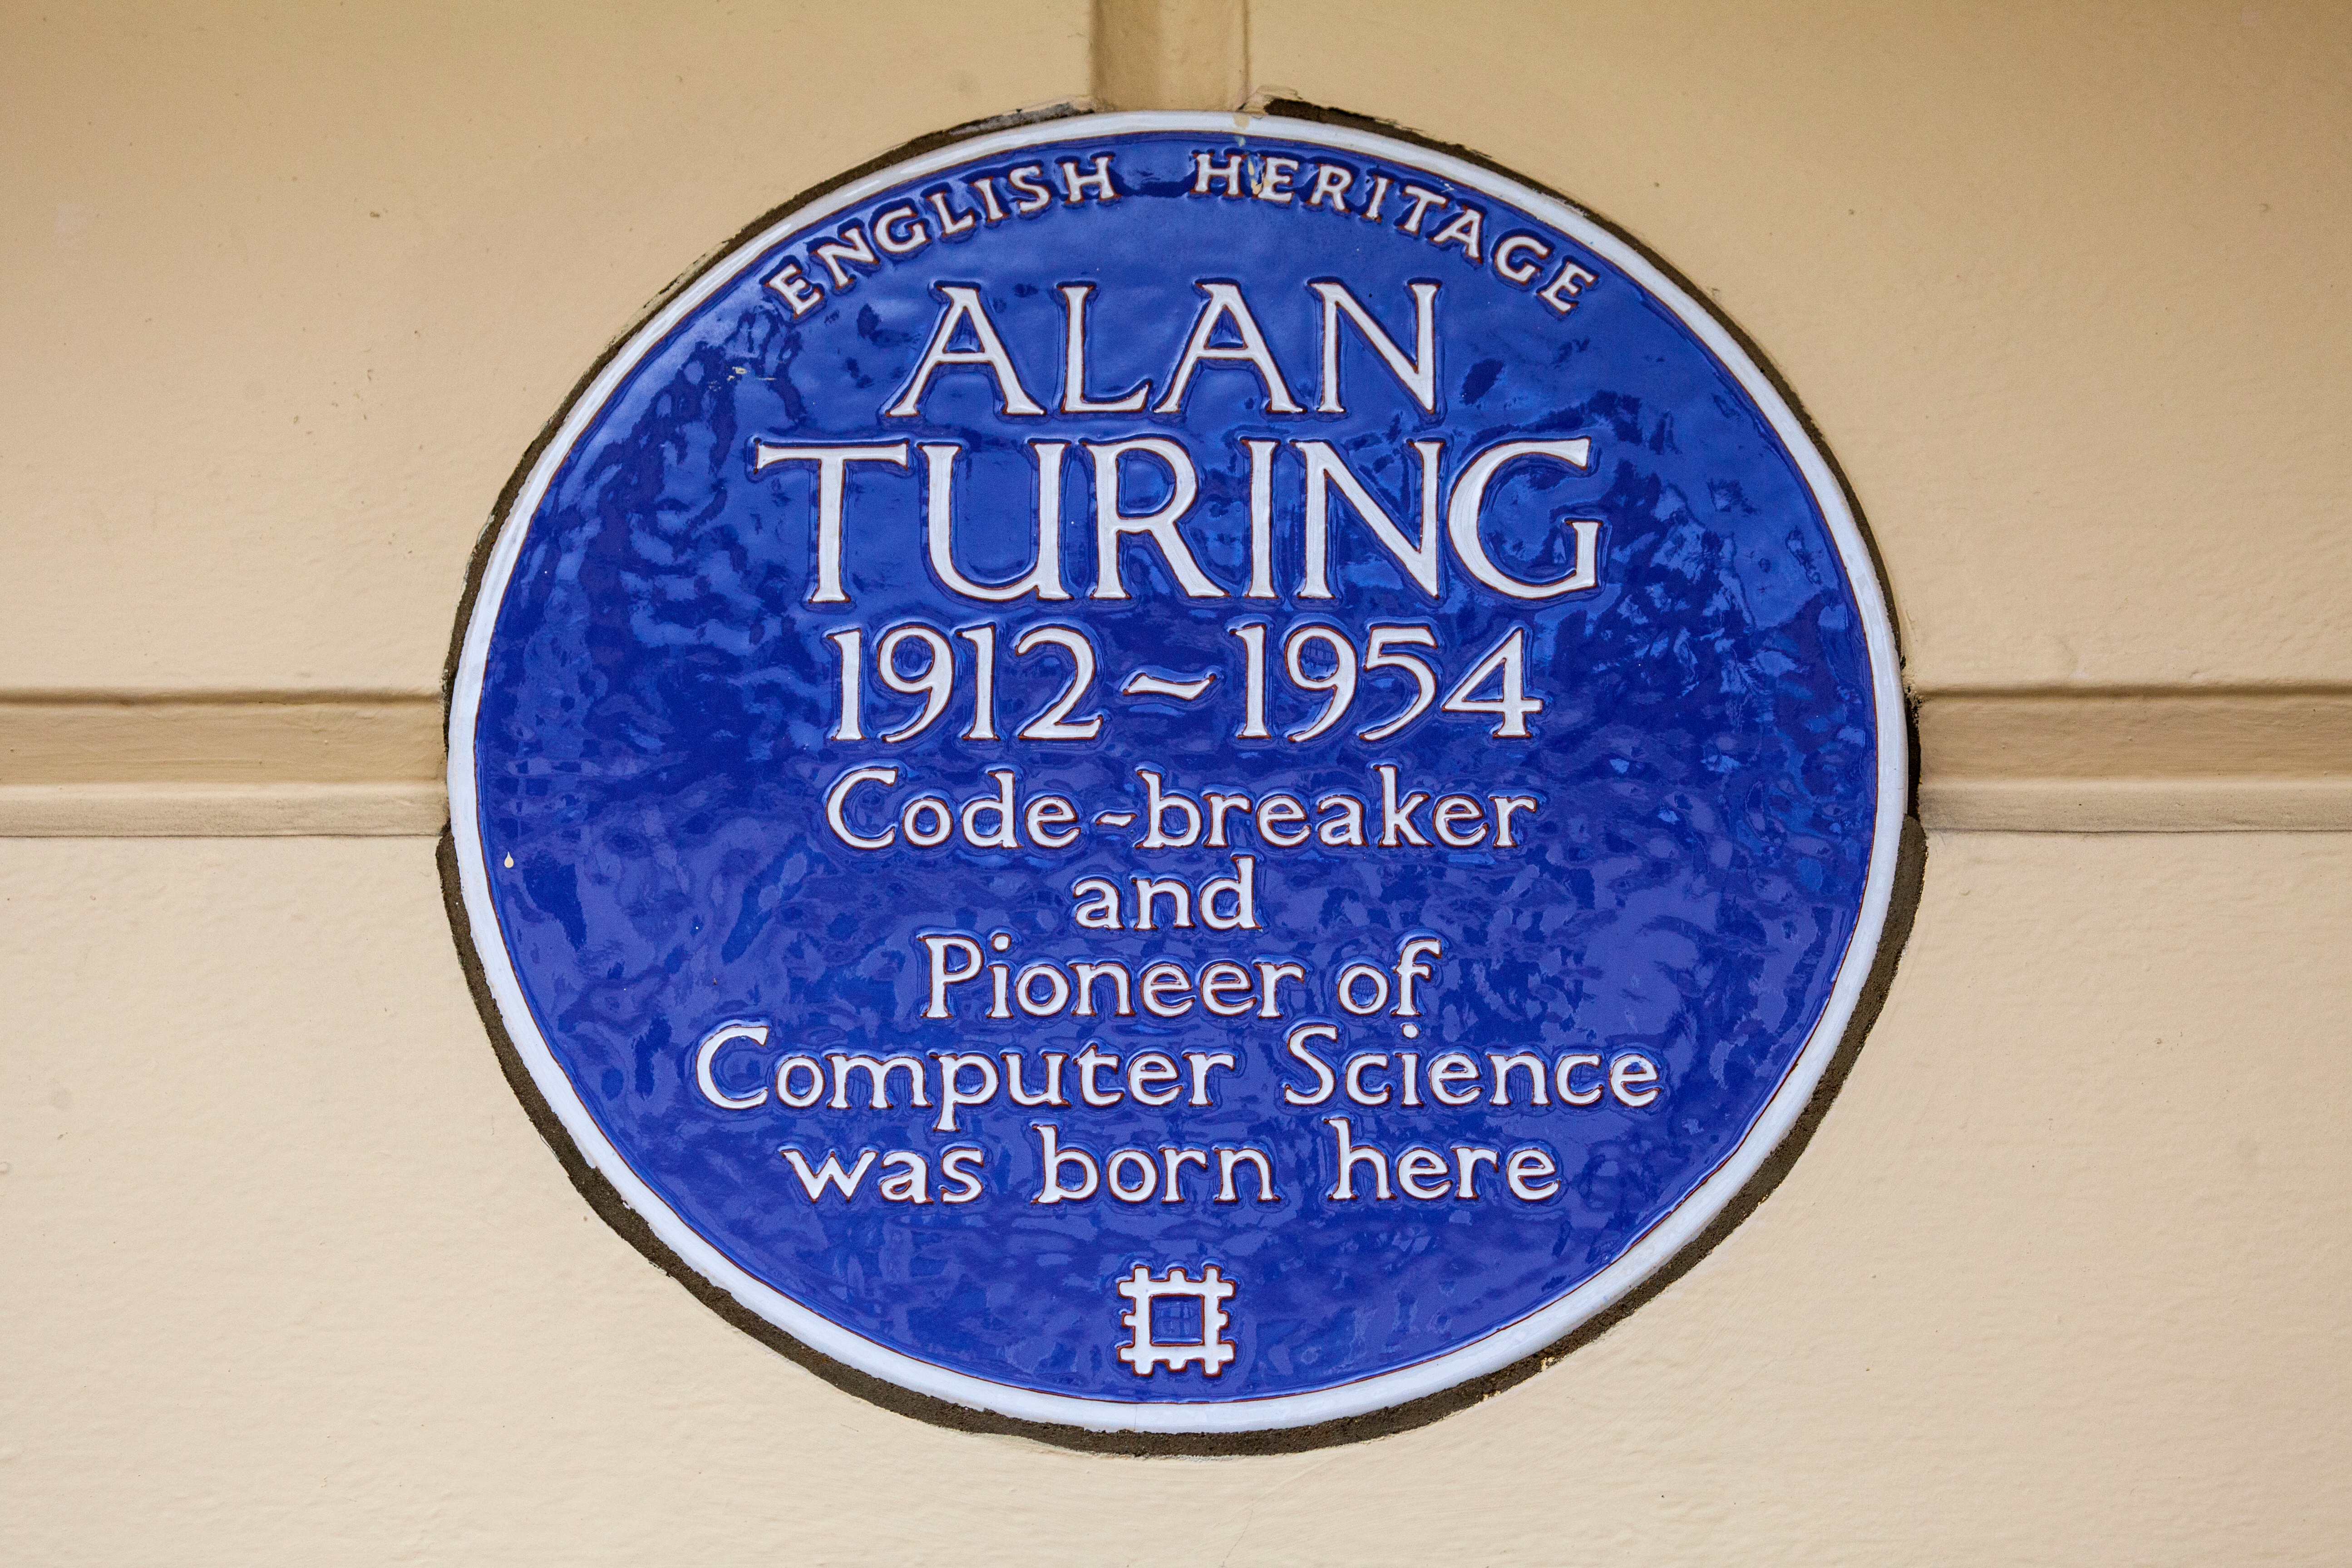 A blue plaque on Warrington Cresent in the Maida Vale area of London, marking the location where famous Code-breaker Alan Turing was born